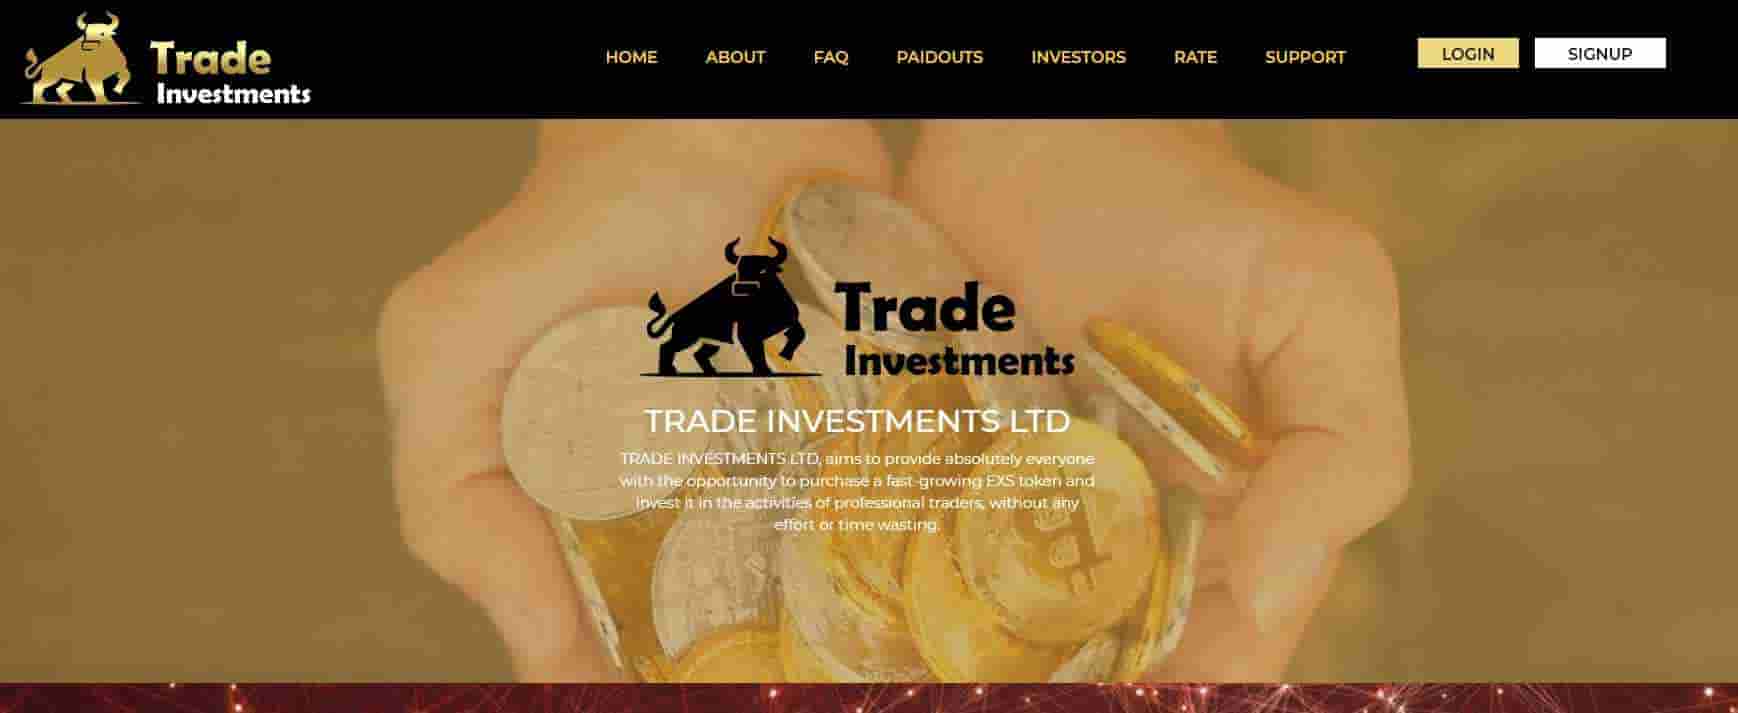 TRADE INVESTMENTS